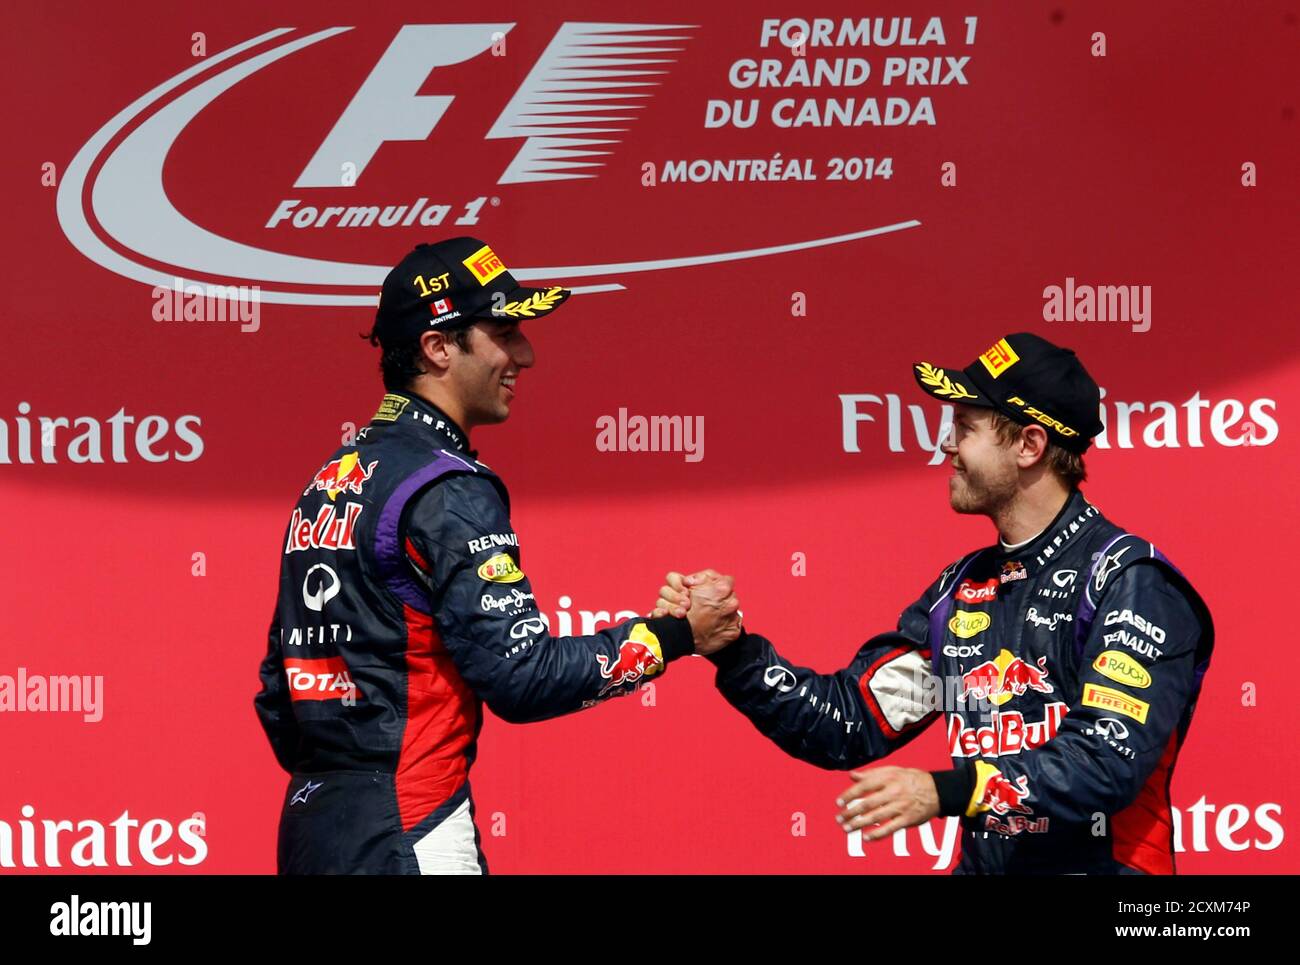 Red Bull Formula One driver Daniel Ricciardo of Australia (L) is congratulated by teammate and thrid place finisher Sebastian Vettel of Germany (R) after winning the Canadian F1 Grand Prix at the Circuit Gilles Villeneuve in Montreal June 8, 2014.  REUTERS/Chris Wattie (CANADA  - Tags: SPORT MOTORSPORT F1) Stock Photo